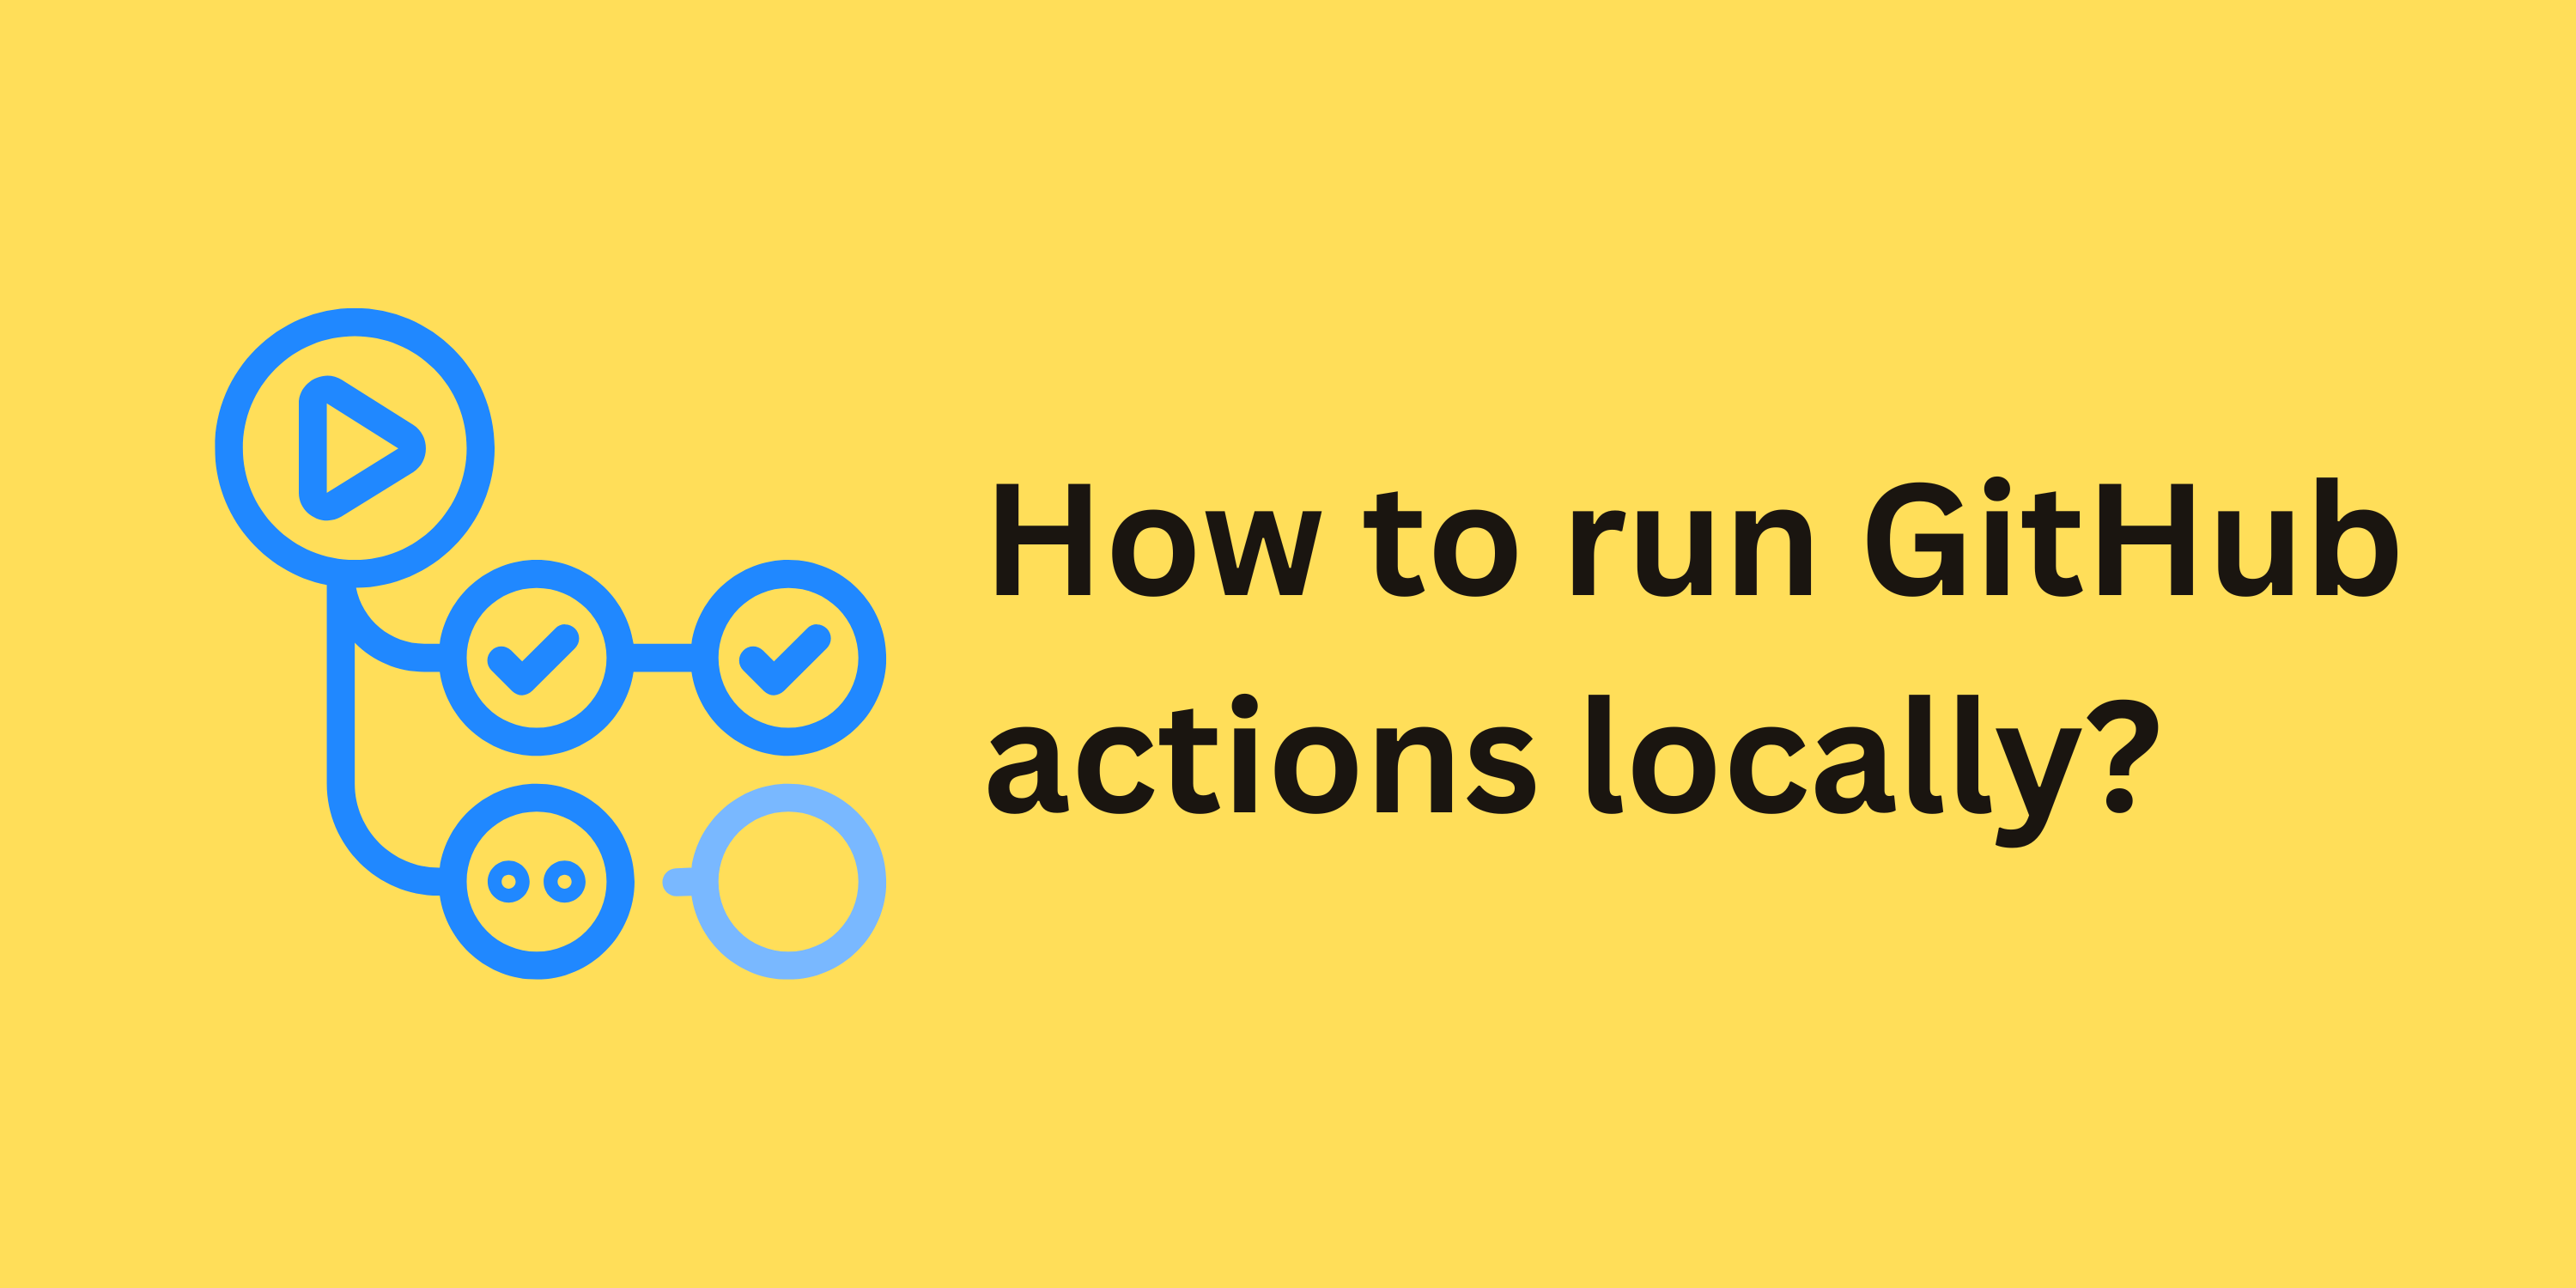 How to Run GitHub Actions Locally Using the act CLI Tool